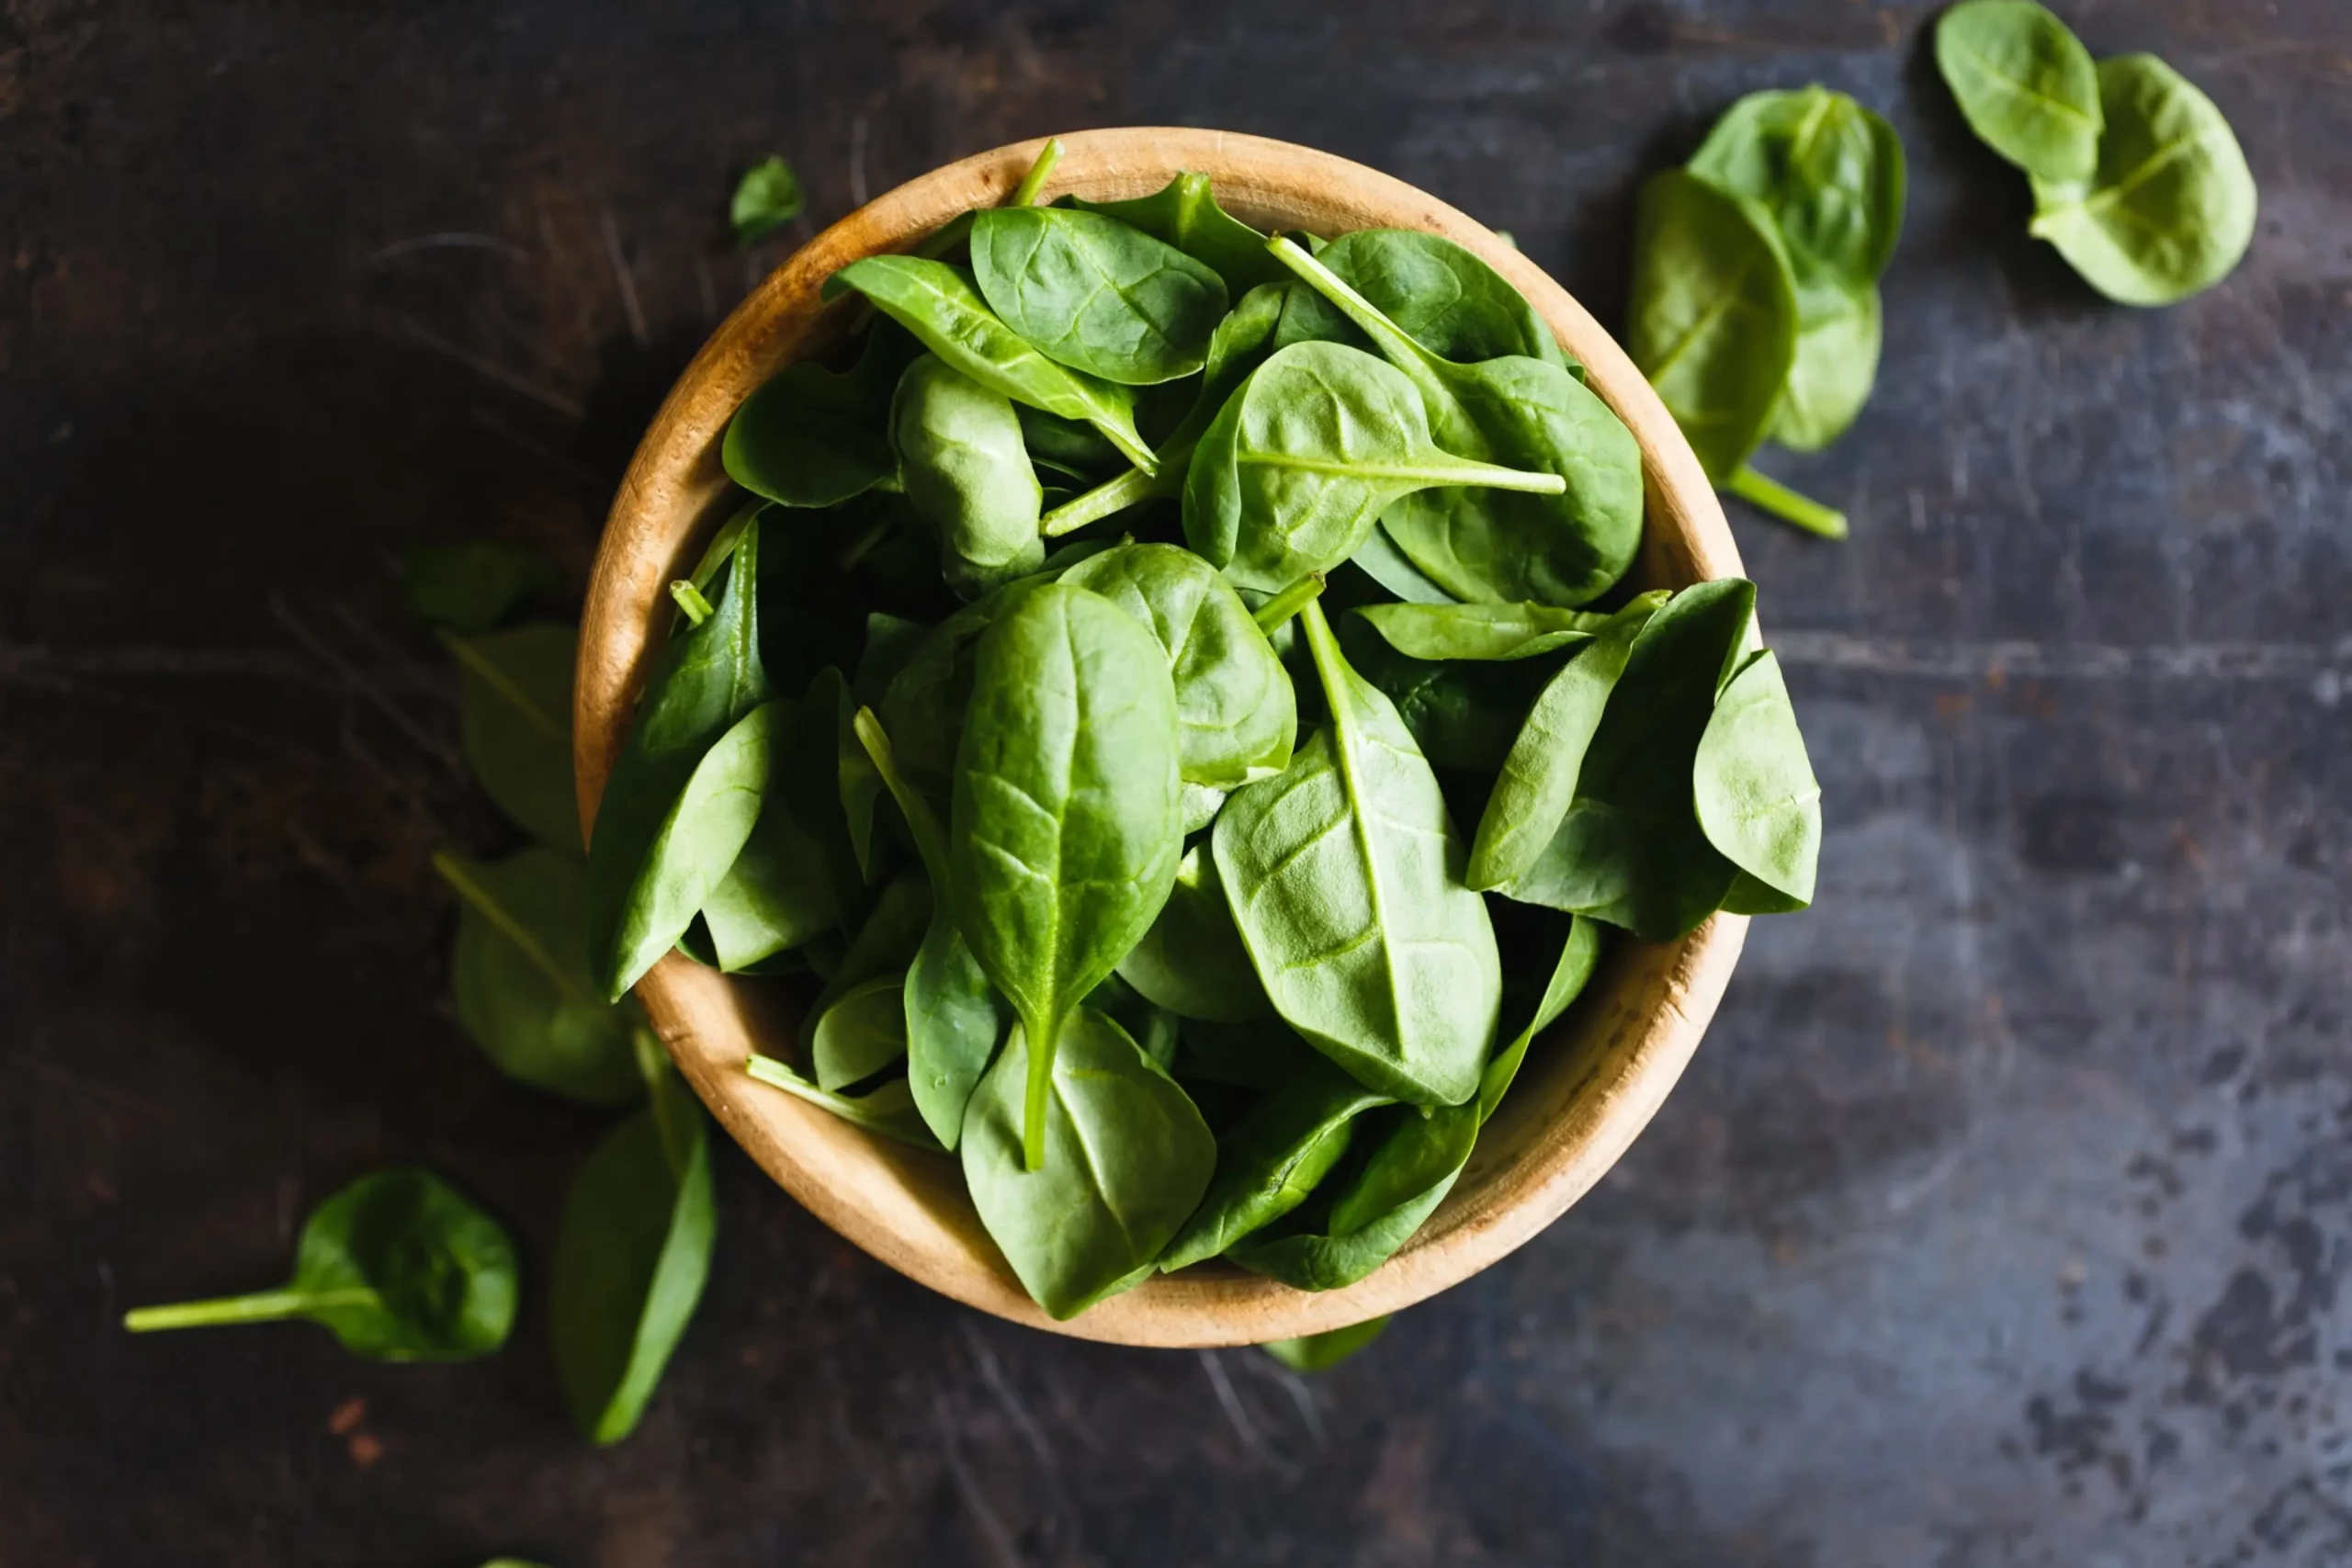 image of spinach in a bowl from above